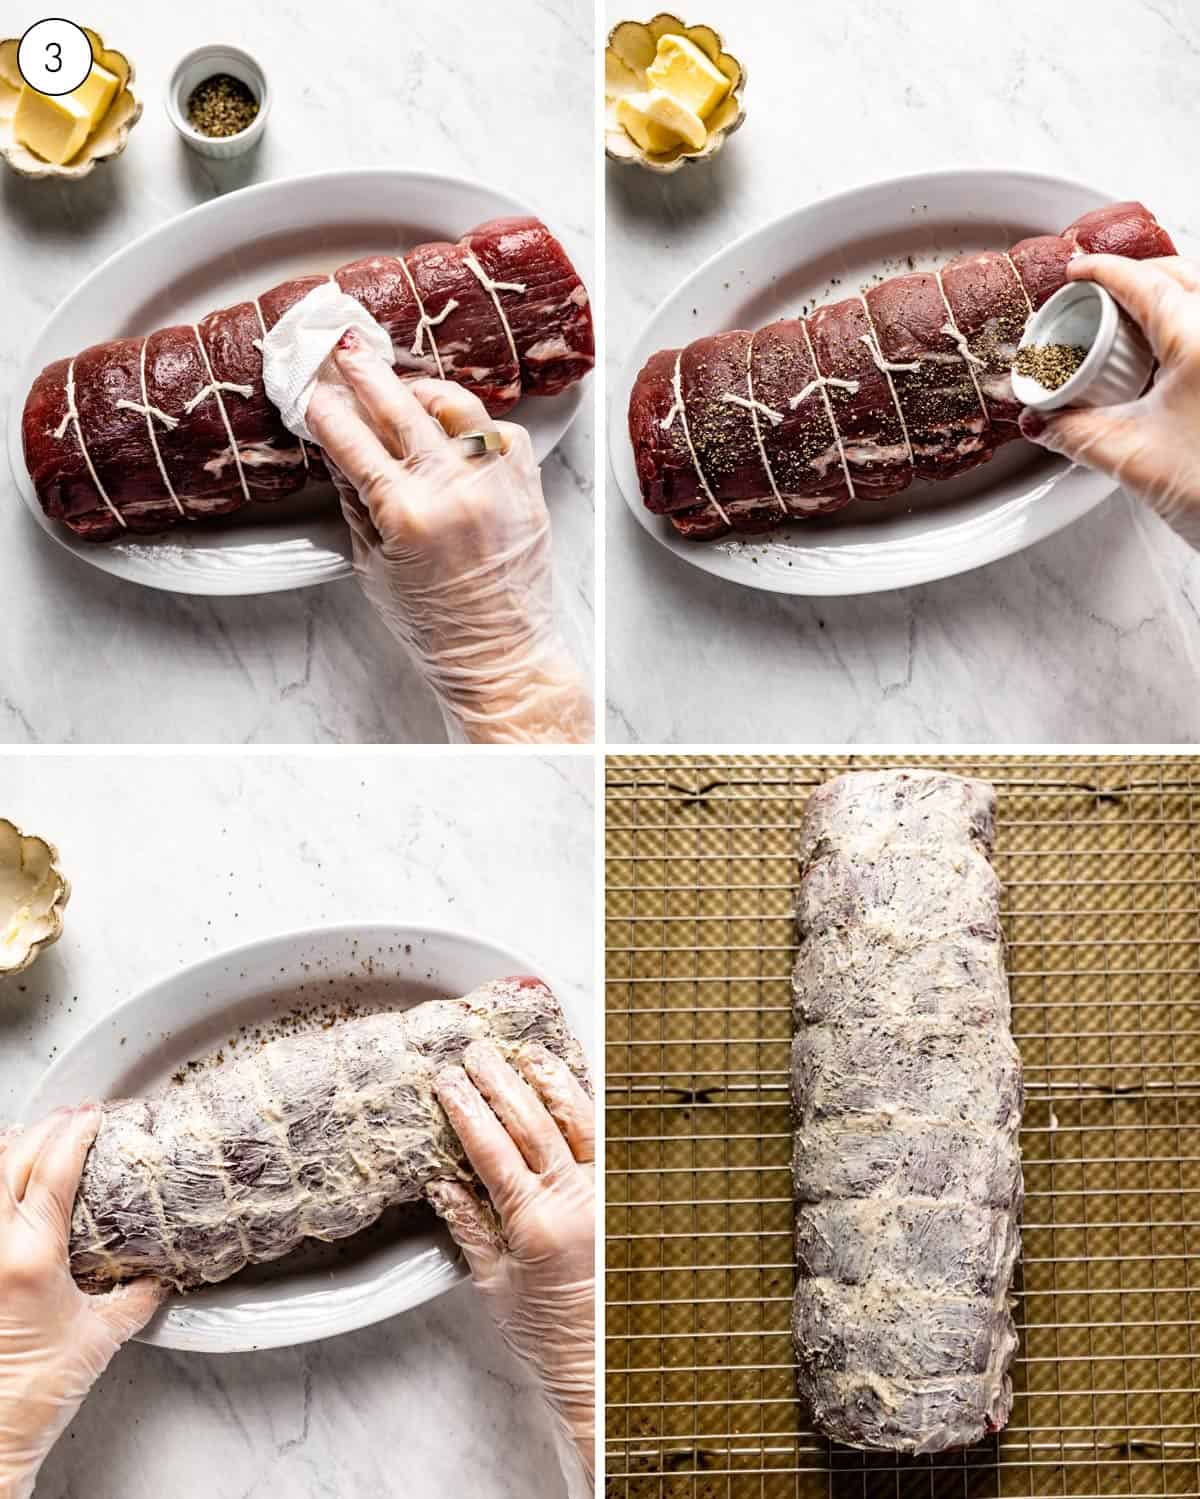 A person rubbing seasonings and butter on a cut of beef from the top view.